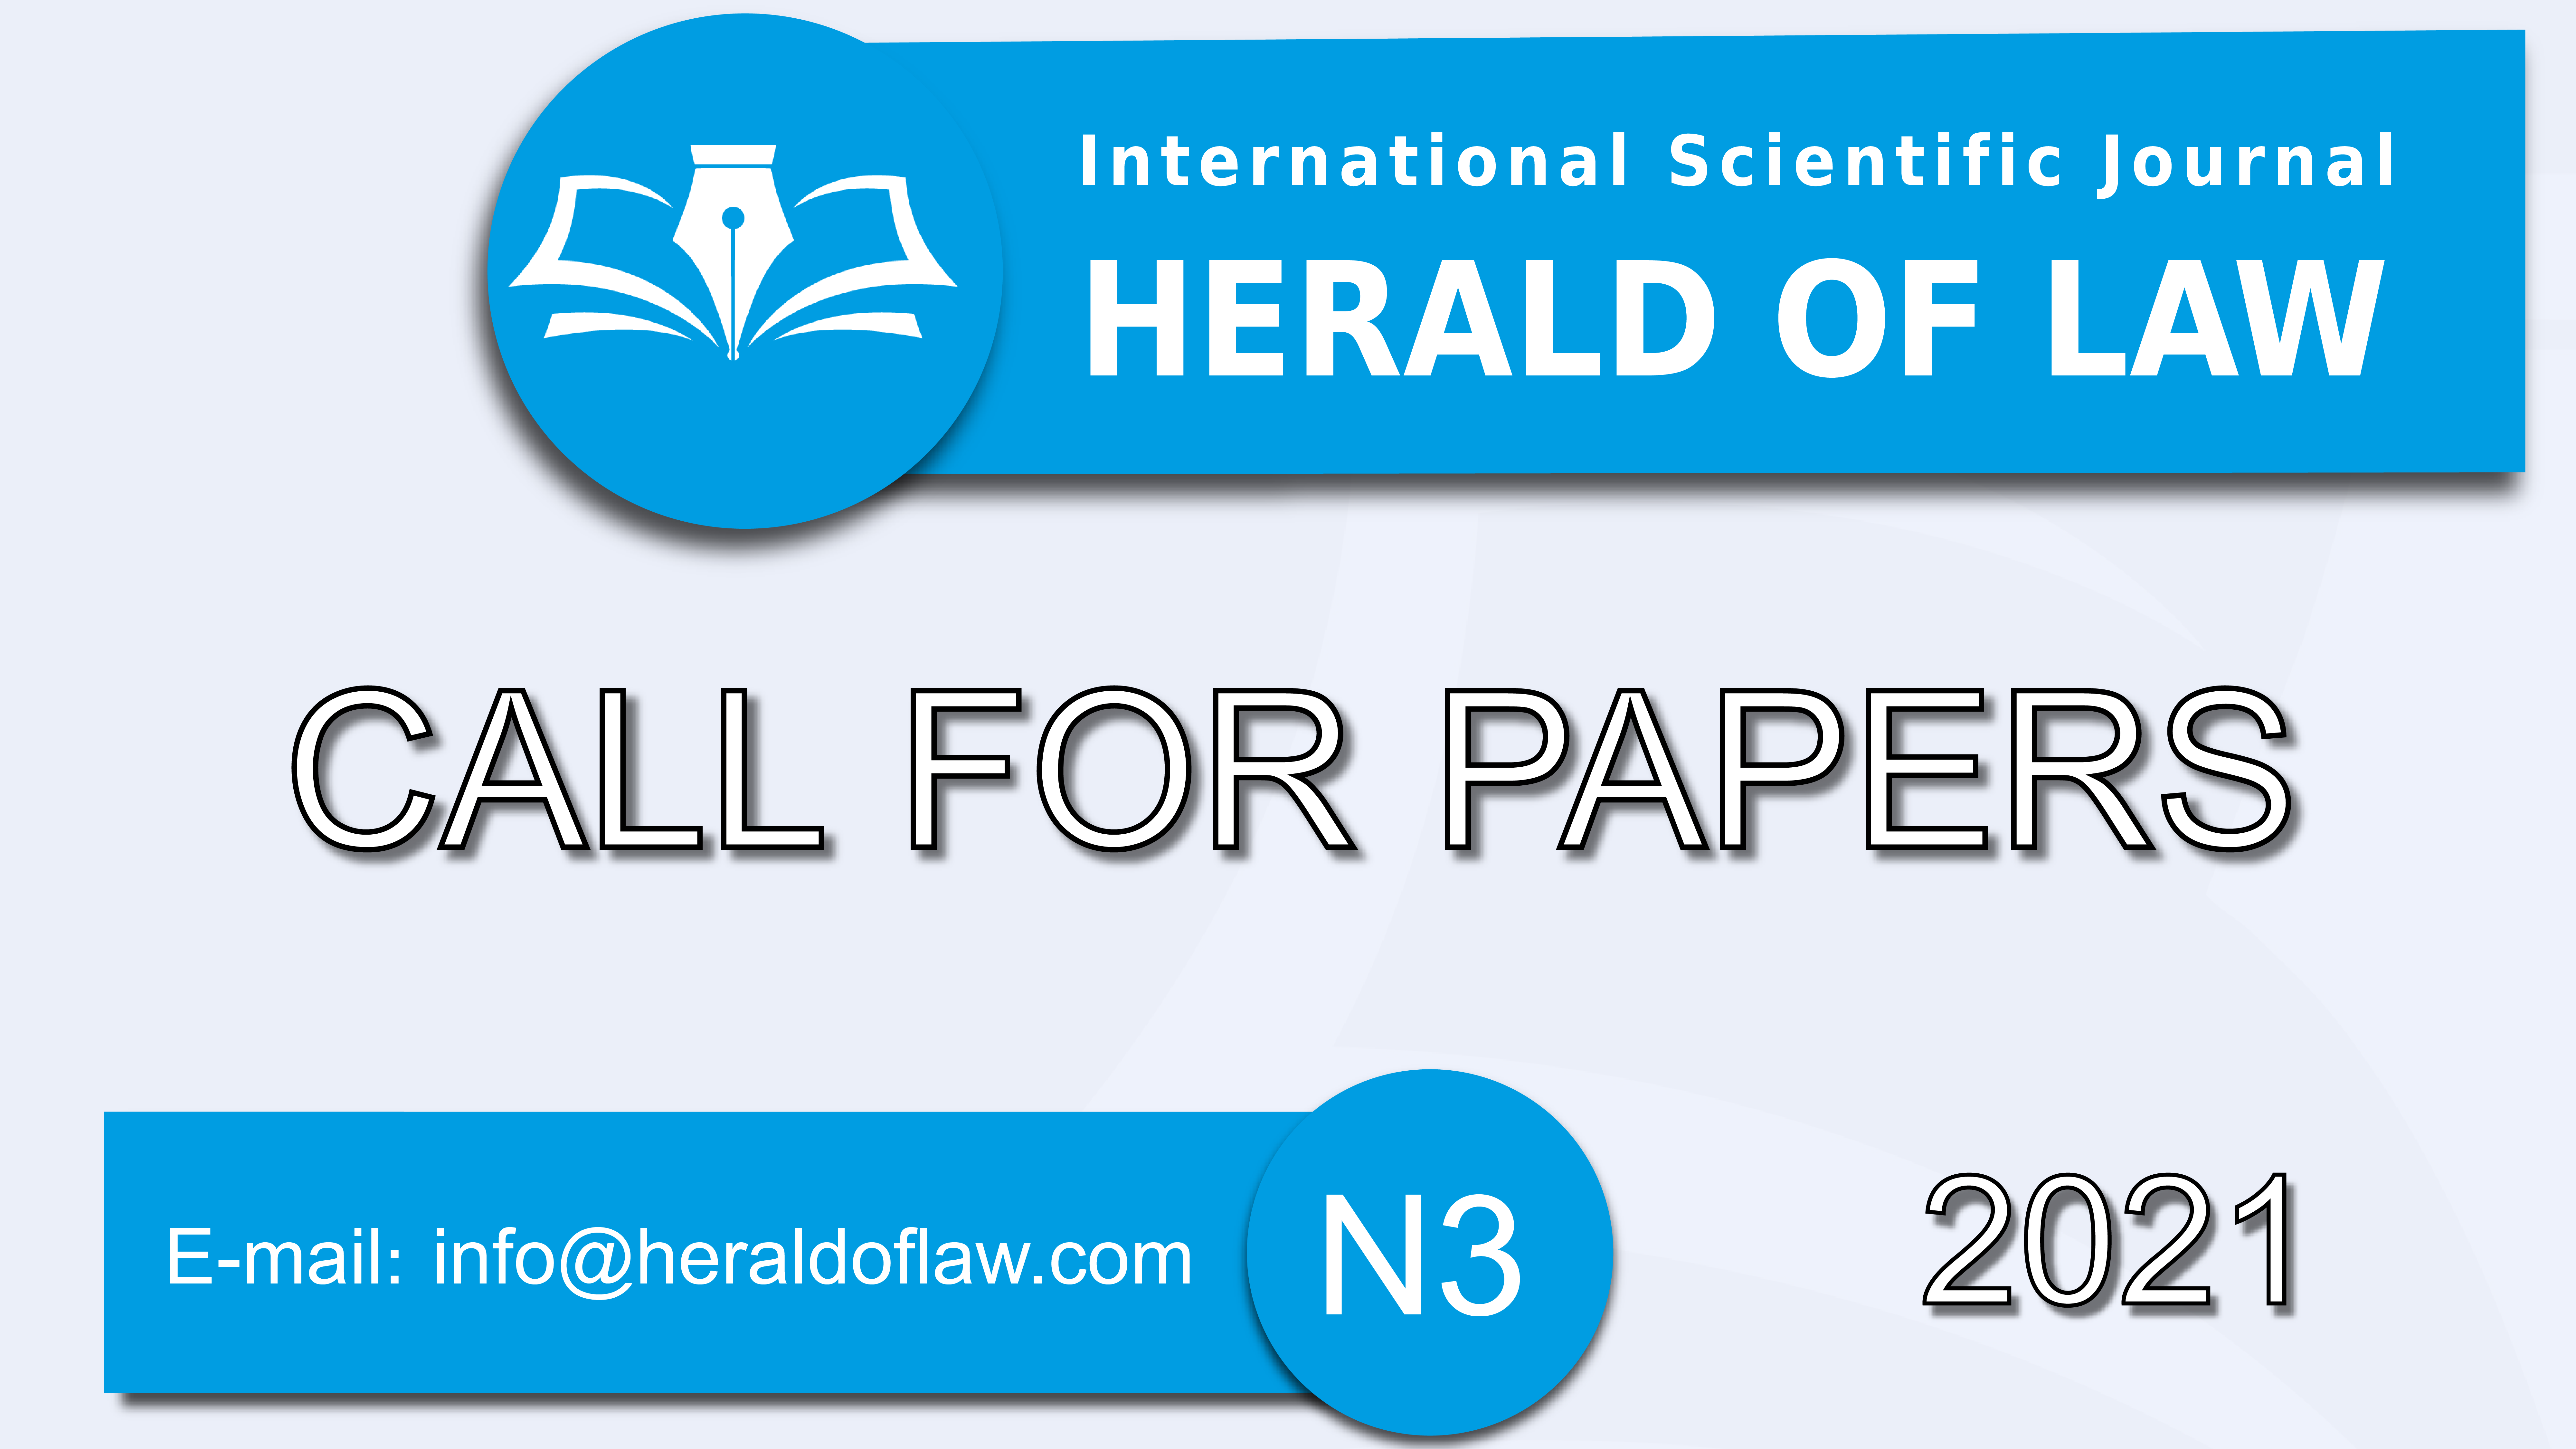 Call for papers for the third (July) issue of the scientific journal “Herald of Law”